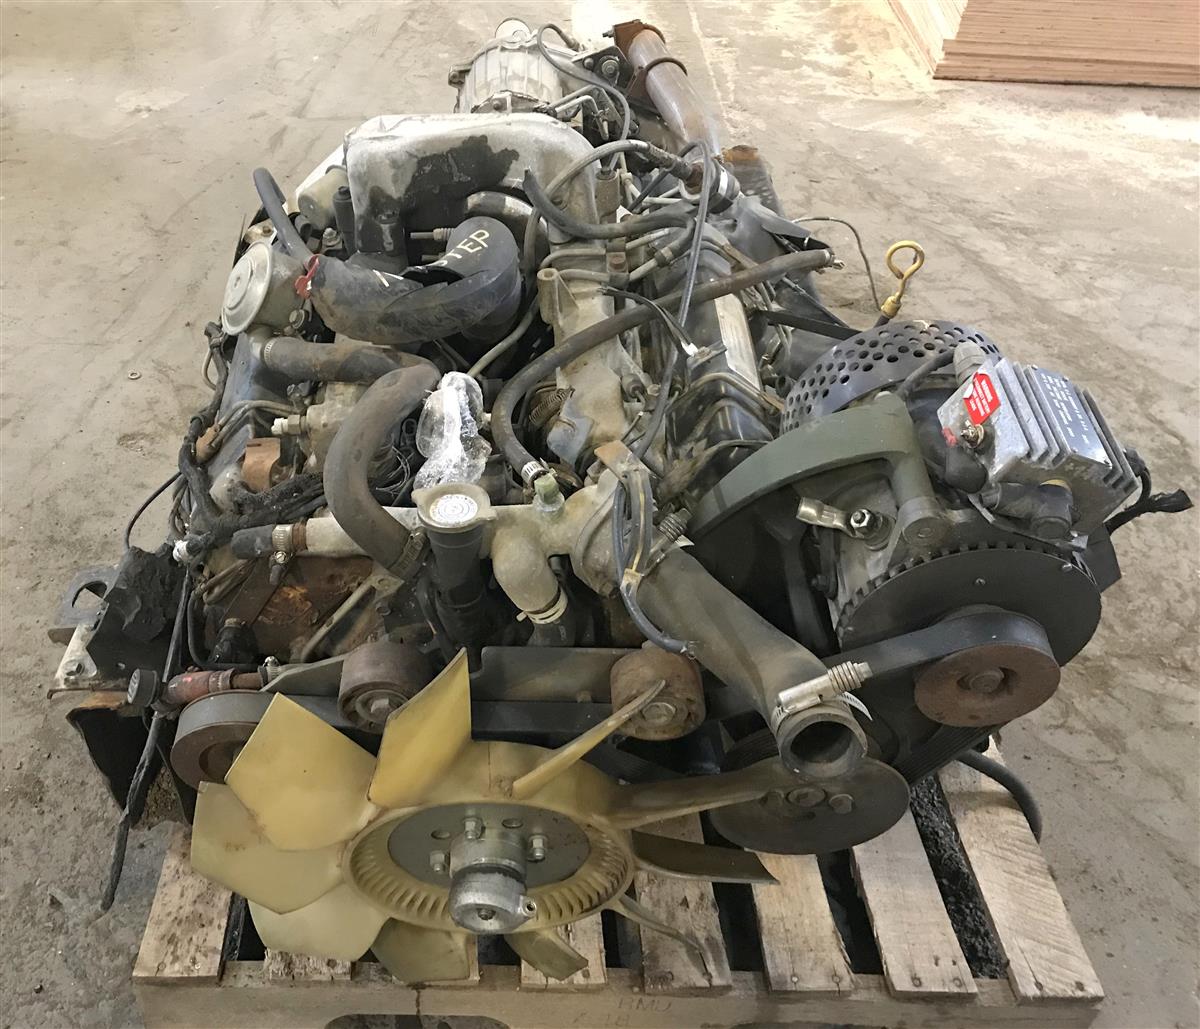 HM-1239 | HM-1239  6.5 Liter Engine with 4 Speed Transmission and Transfer Case (Turbo) (13).JPG